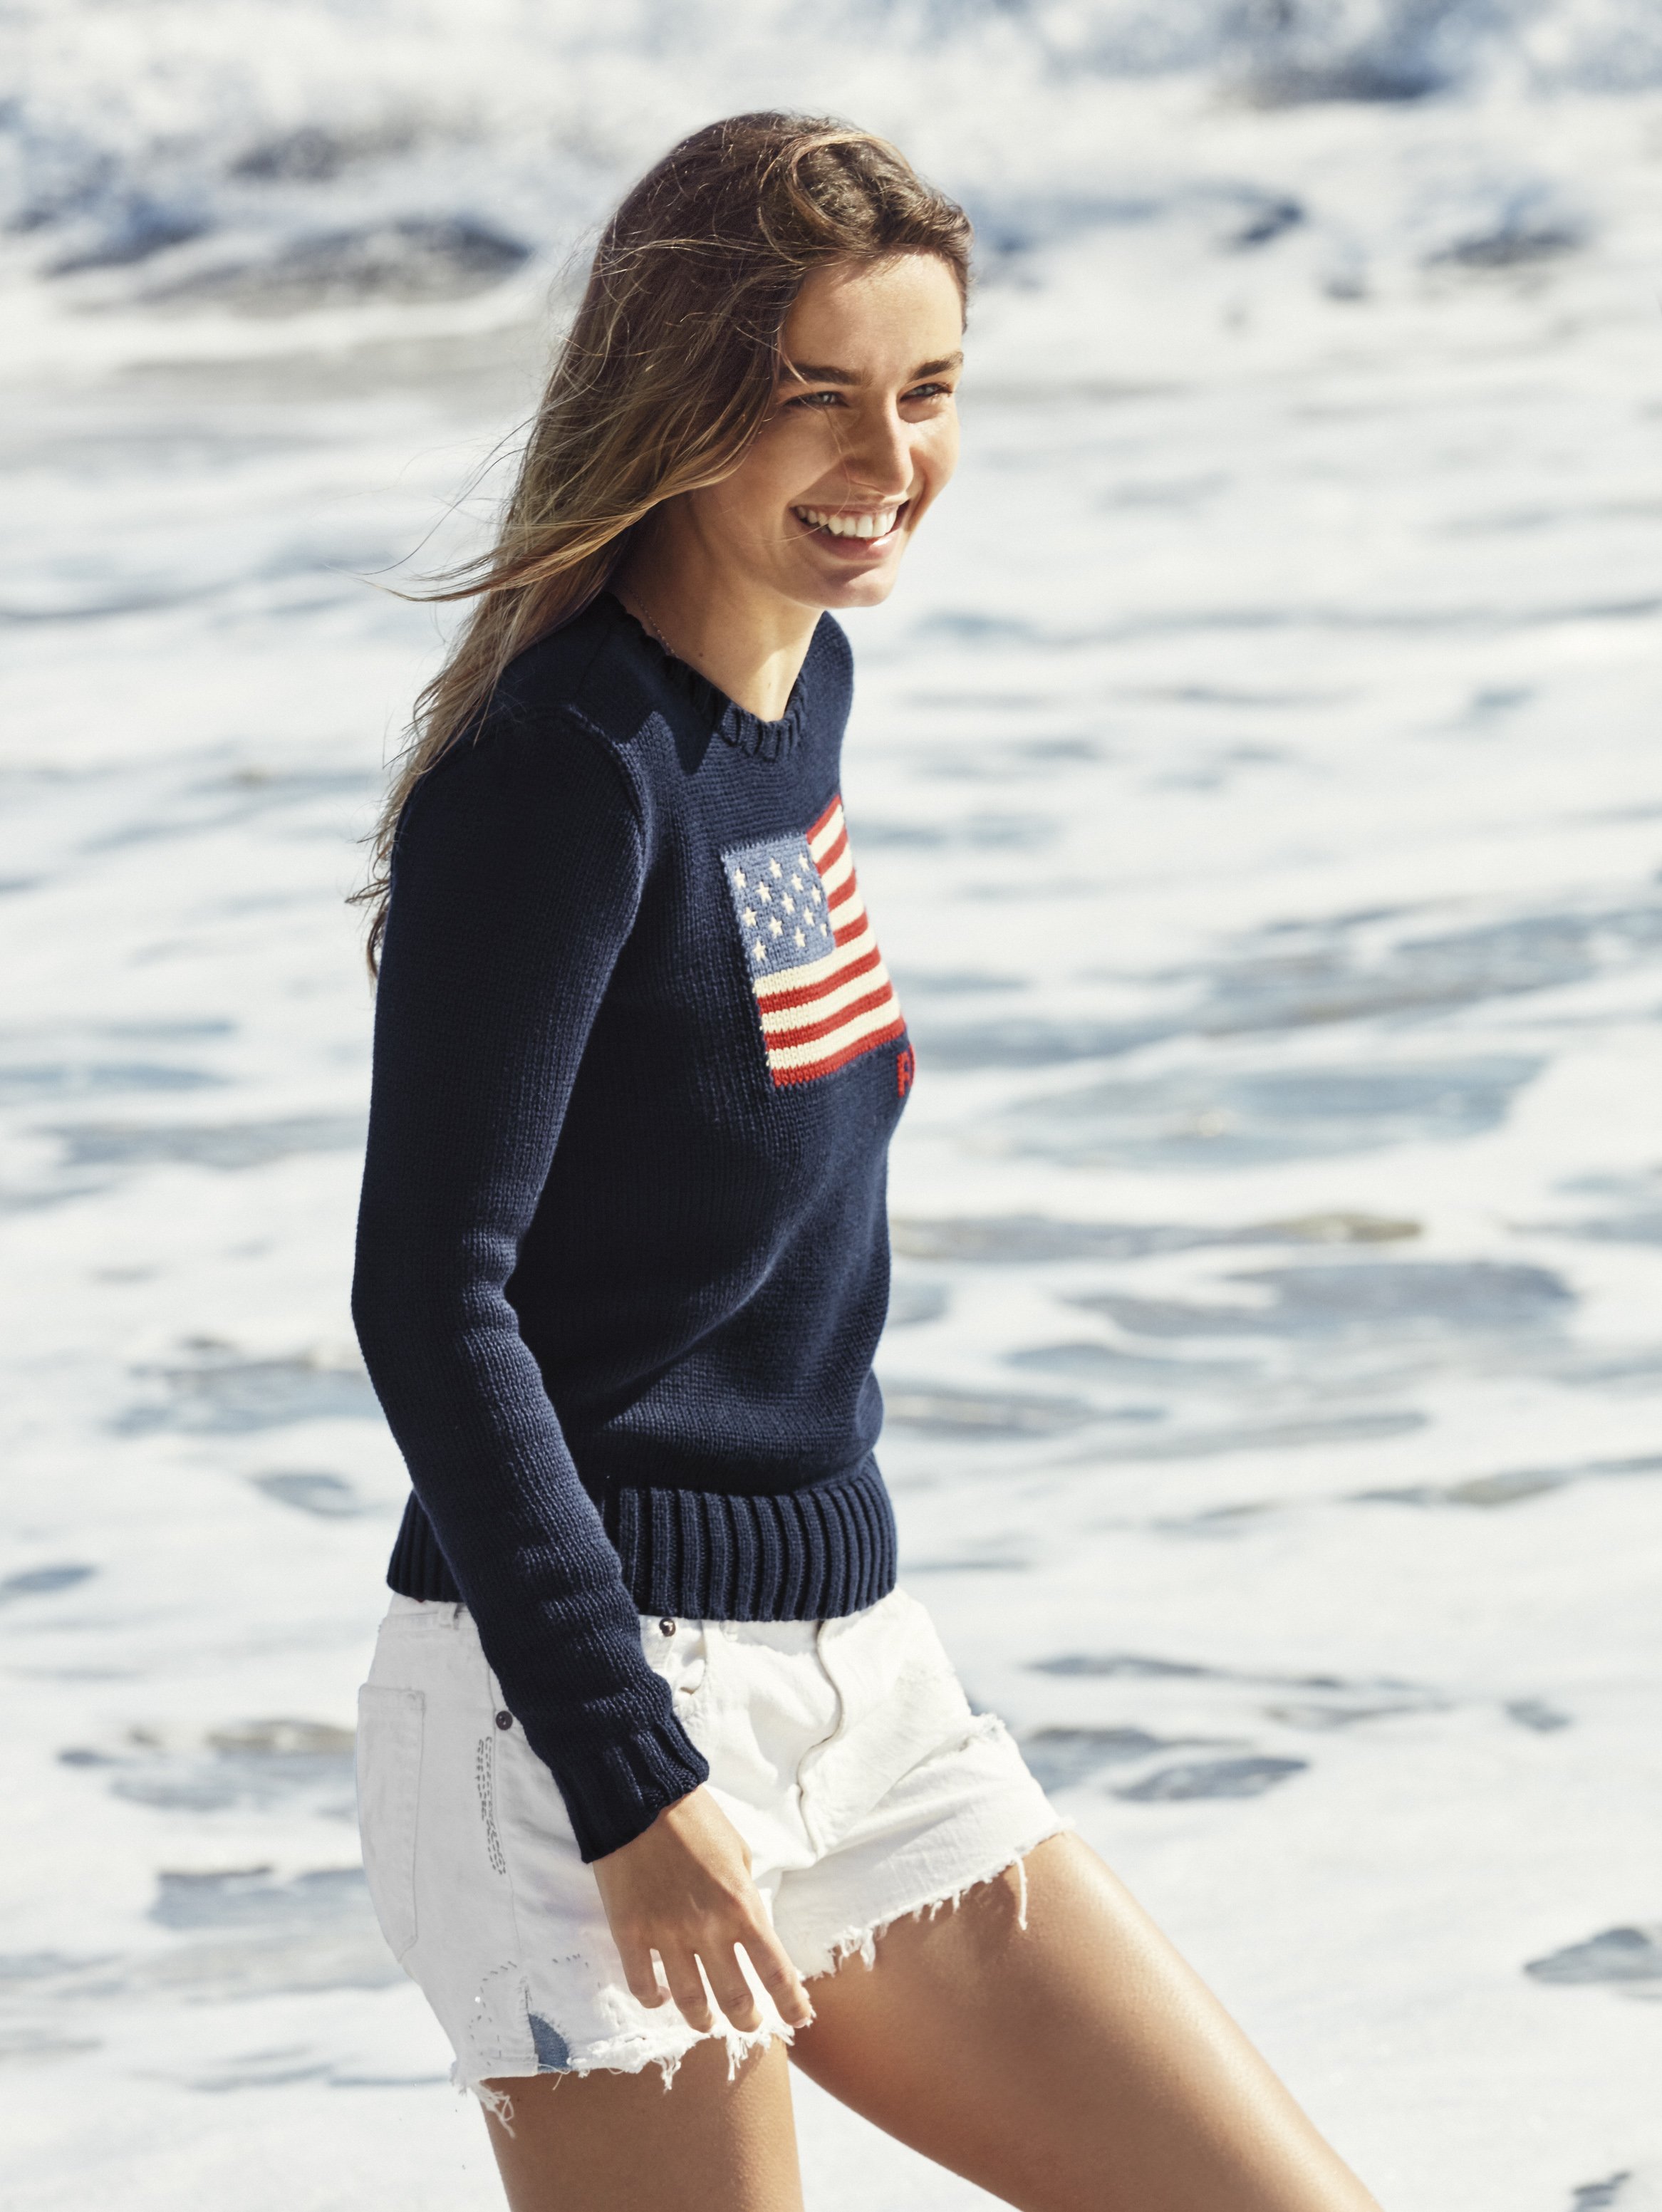 Ralph Lauren on Twitter: "The American Flag Sweater: An iconic #Polo style  and one of summer's most effortless layers. https://t.co/NoDQP8PKxY  https://t.co/pfZg9F4SWW" / Twitter